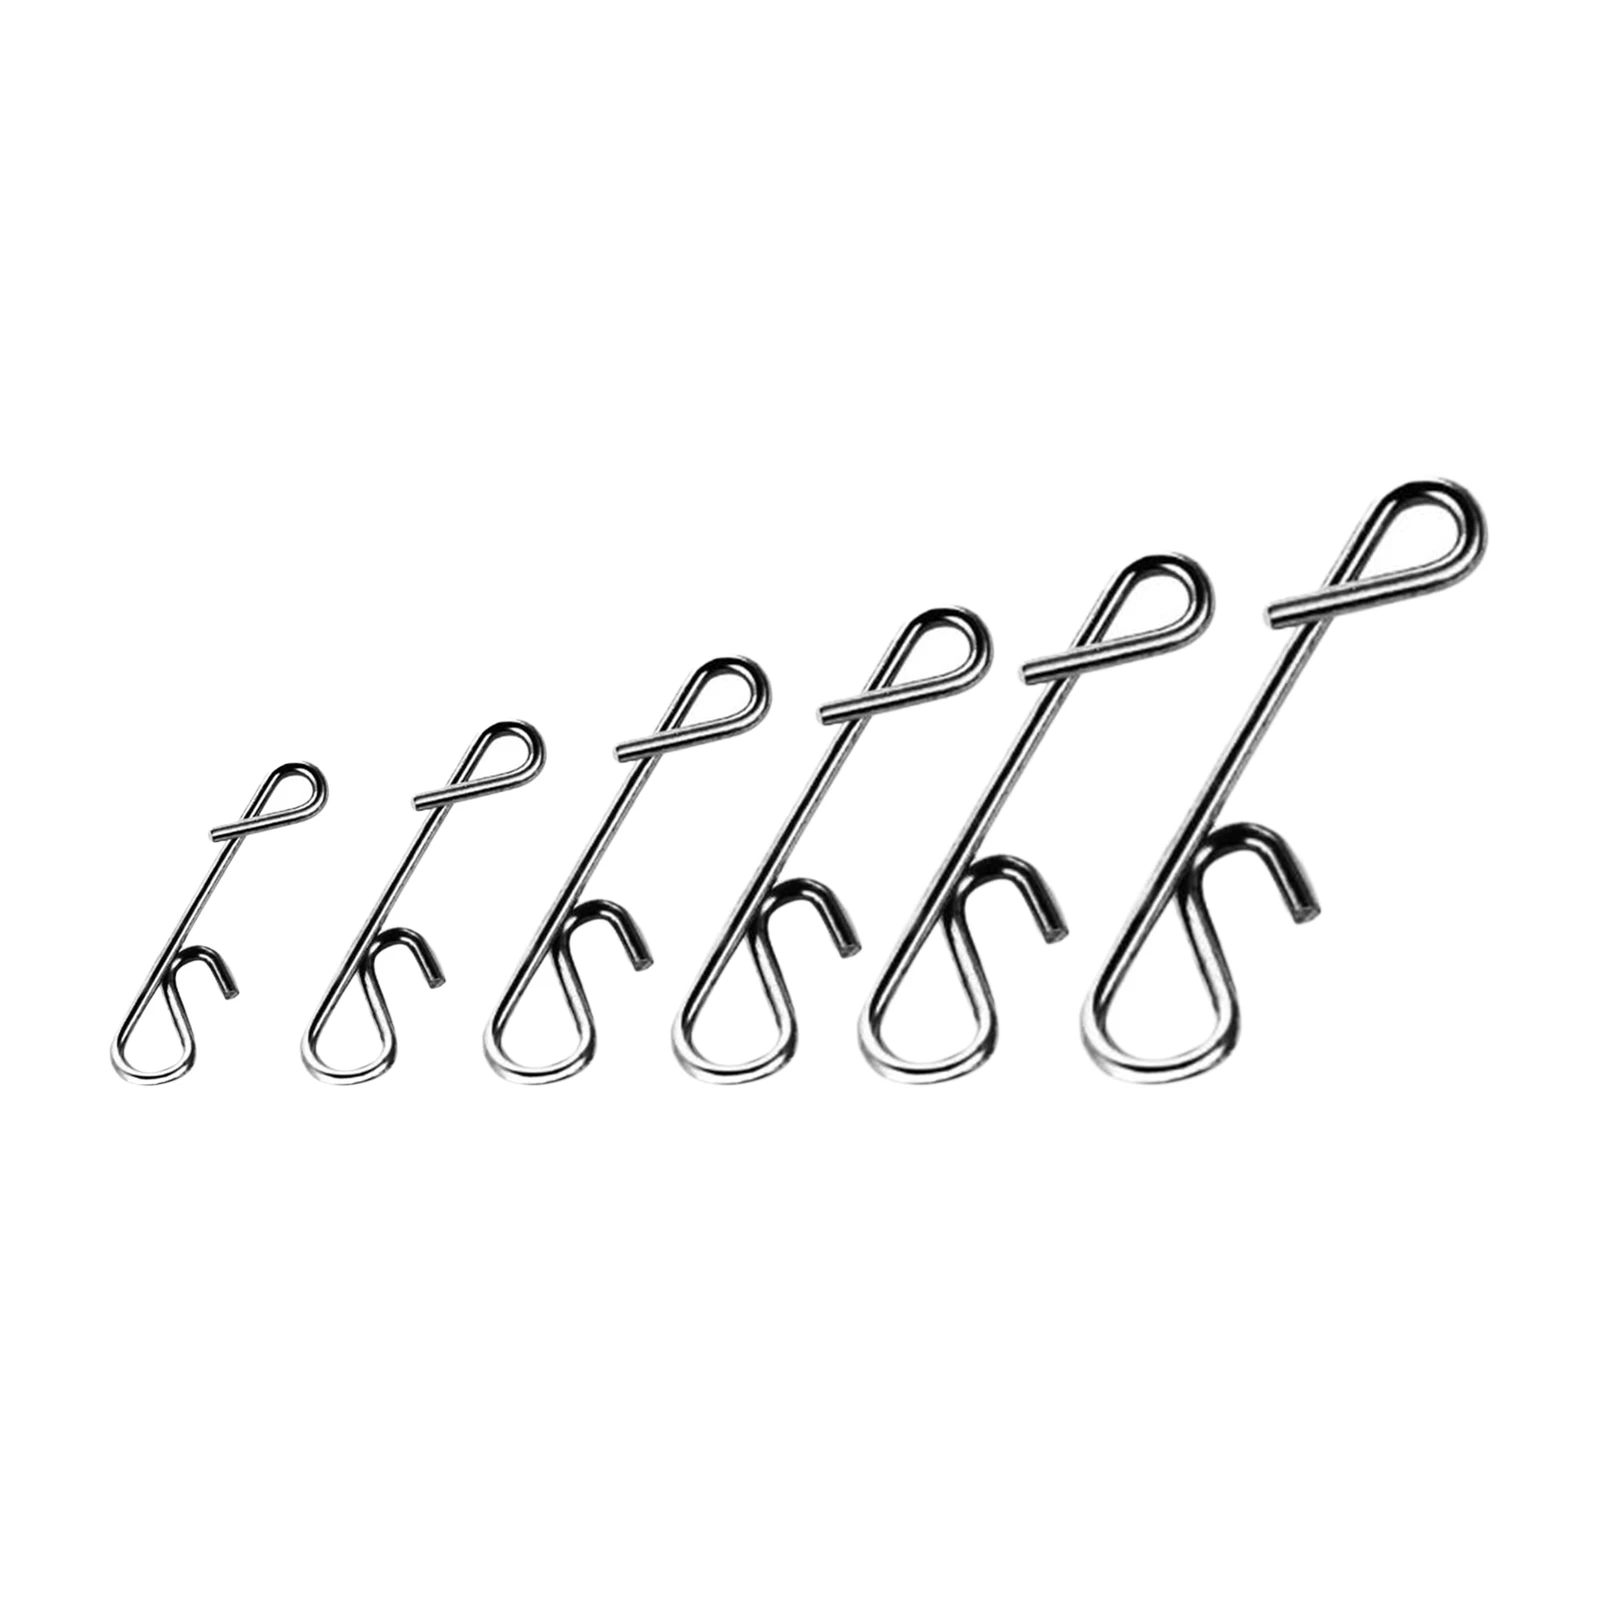 150 pieces Longline Fishing Clips Long Line Wire Swivels Connector Snaps Hangers Accessories Tackle